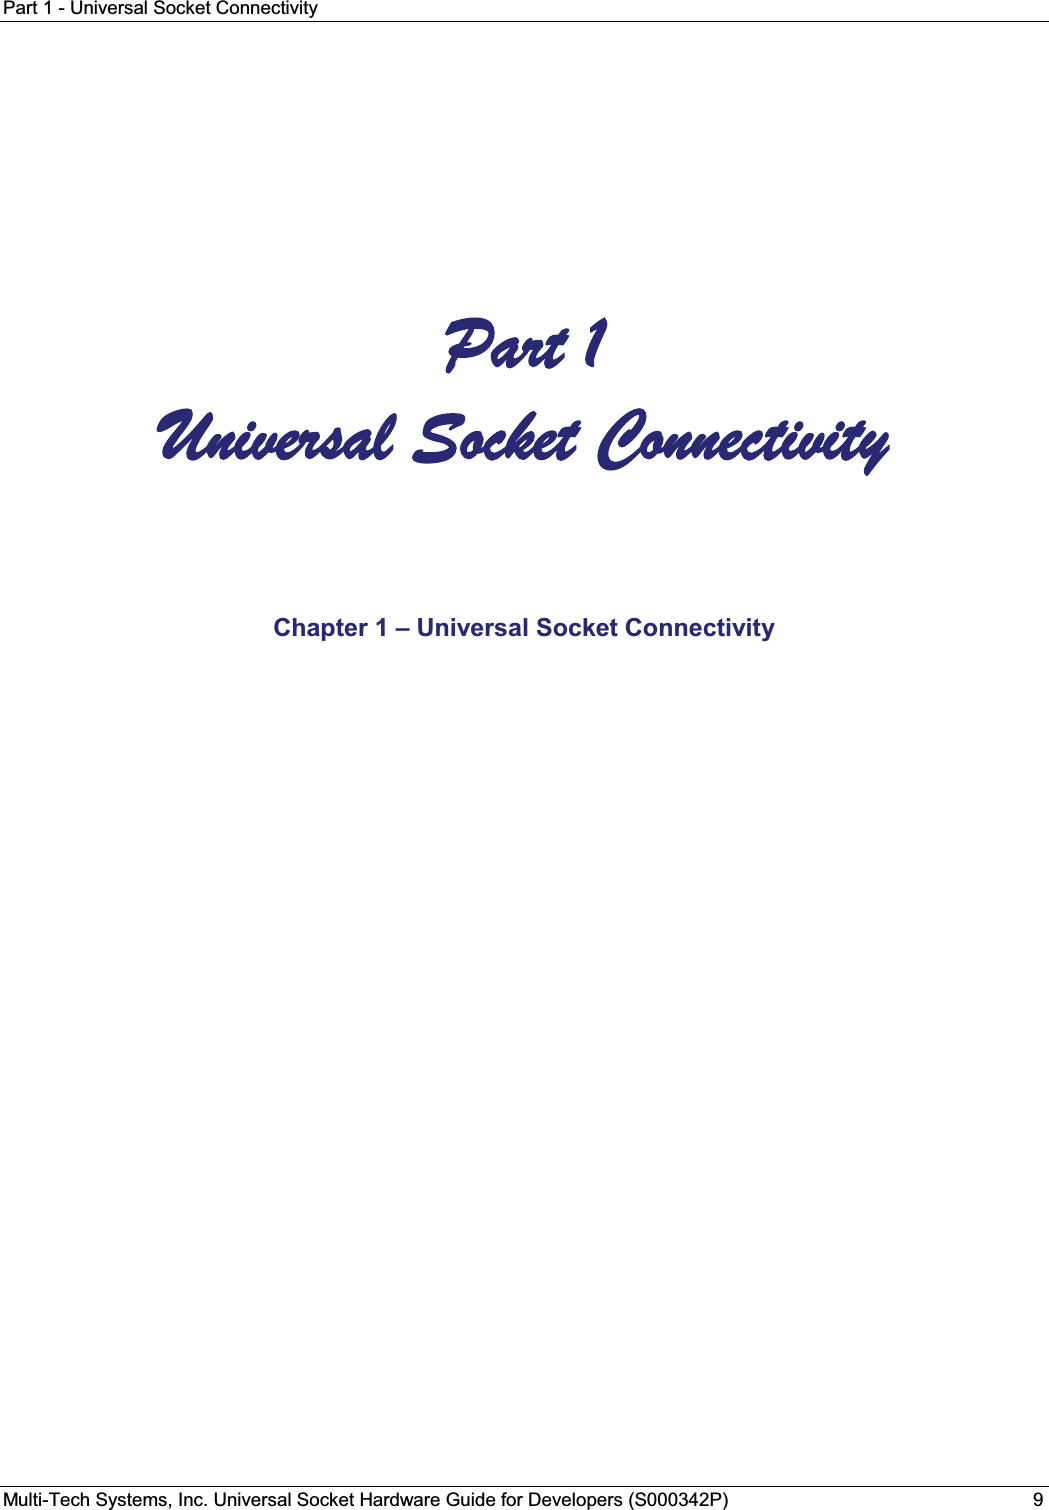 Part 1 - Universal Socket ConnectivityMulti-Tech Systems, Inc. Universal Socket Hardware Guide for Developers (S000342P) 9PPart 1 Universal Socket Connectivity  Chapter 1 – Universal Socket Connectivity